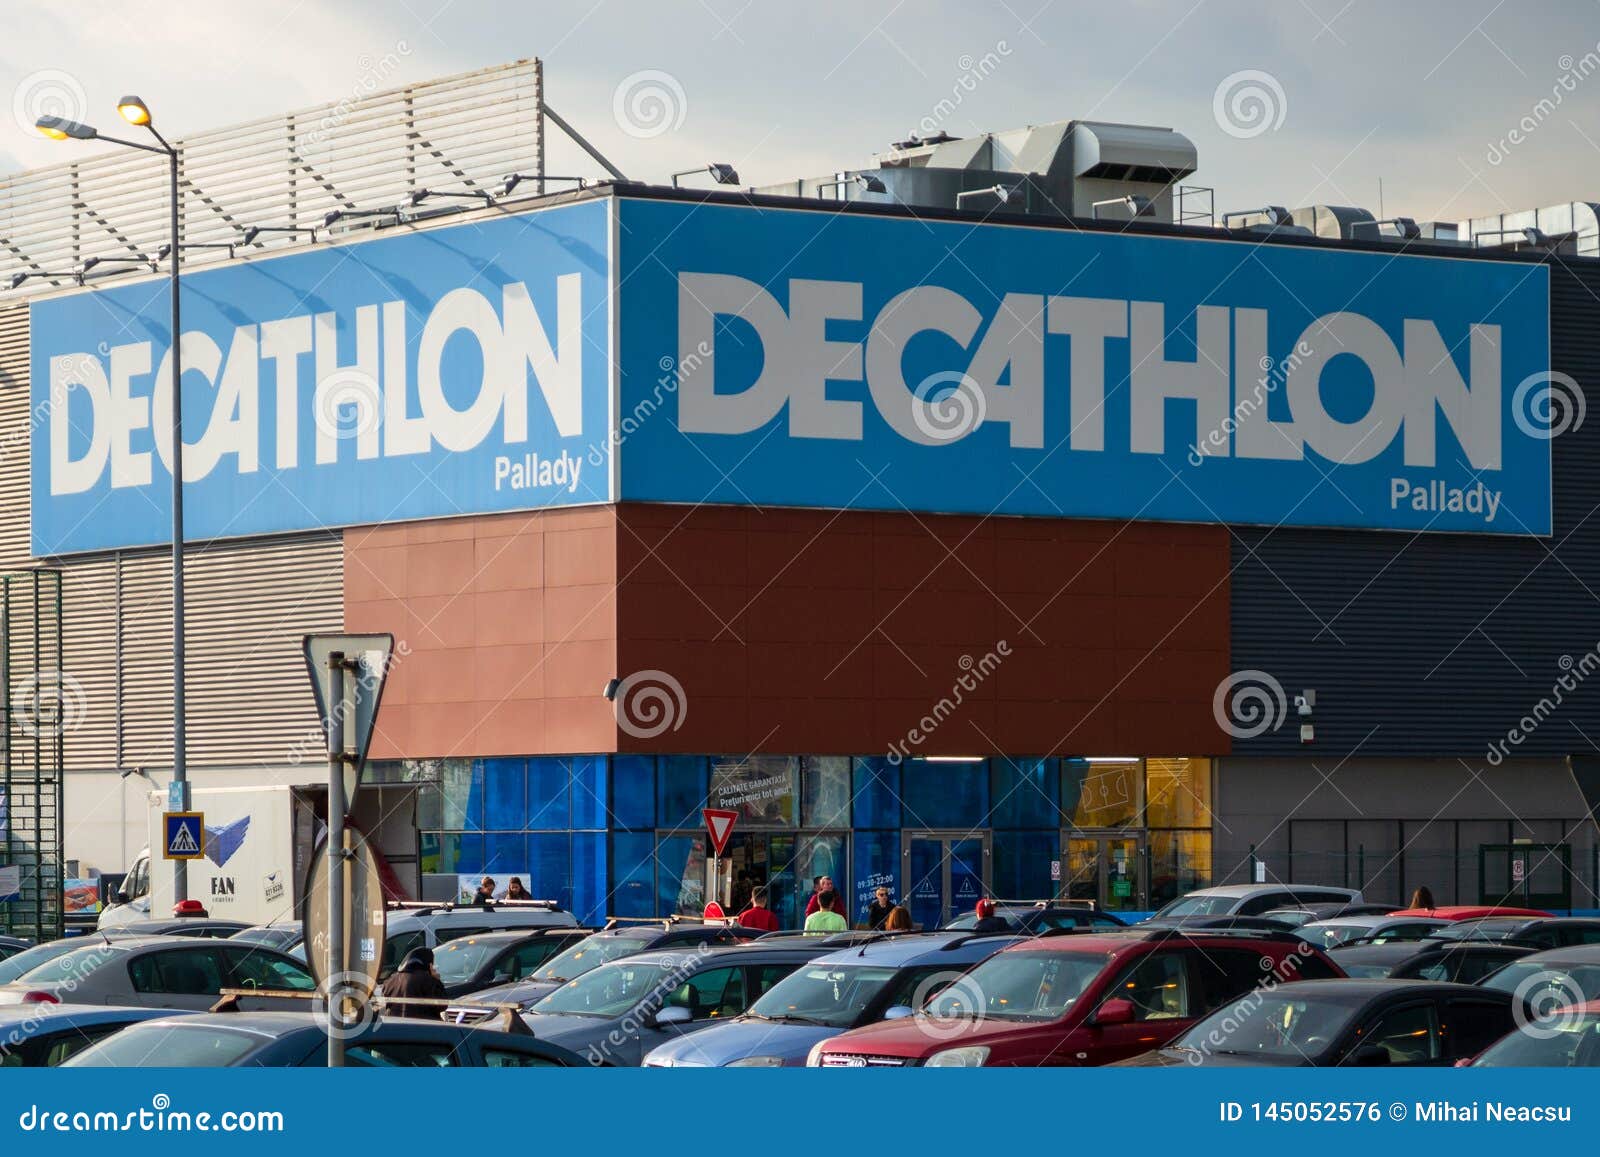 Decathlon Pallady Store Front and Entrance in Sector 3, Bucharest, Romania.  Editorial Photo - Image of company, commercial: 145052576